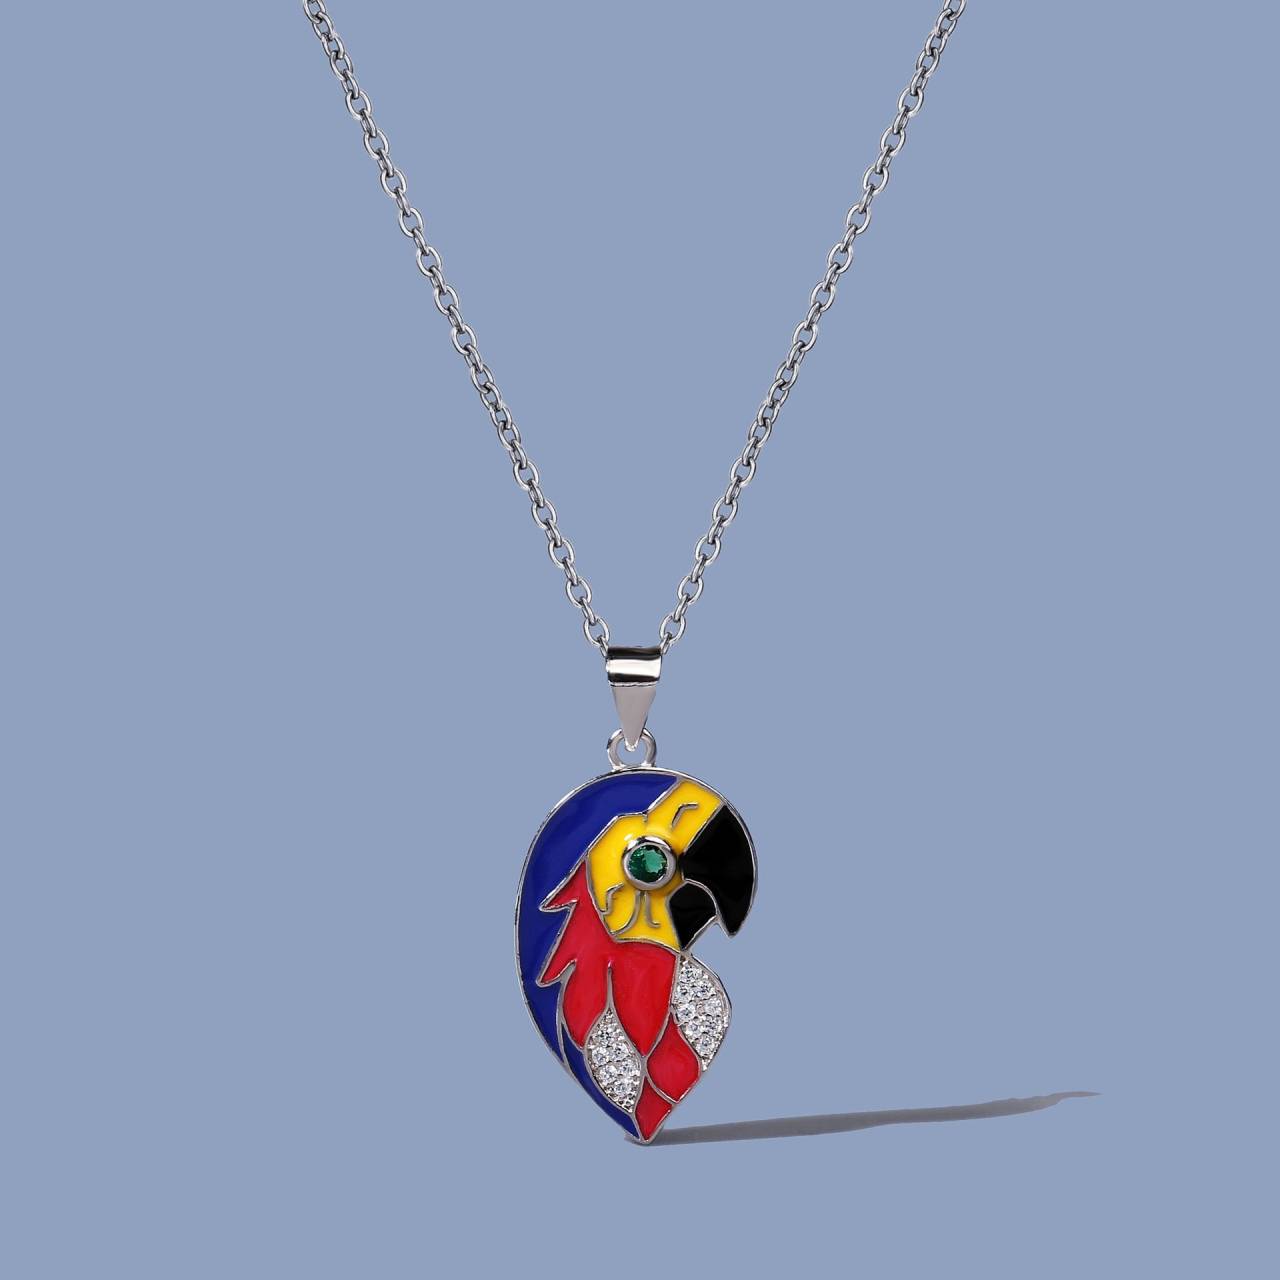 🎉🎉Parrot Pendant Necklace  🎉🎉“Dont settle. You deserve someone who listens, cares, and thinks youre too important to lose.” #accessories#aesthetic#alternative#art#artsy makeup#beauty#clothes#design#earrings#fashion#fashion design#girl#handmade#hiphop#jewelry#jewels#love#luxury#makeup#minimalism#models#nail art#pretty#rings#street fashion#street style#streetwear#style#vintage#wedding